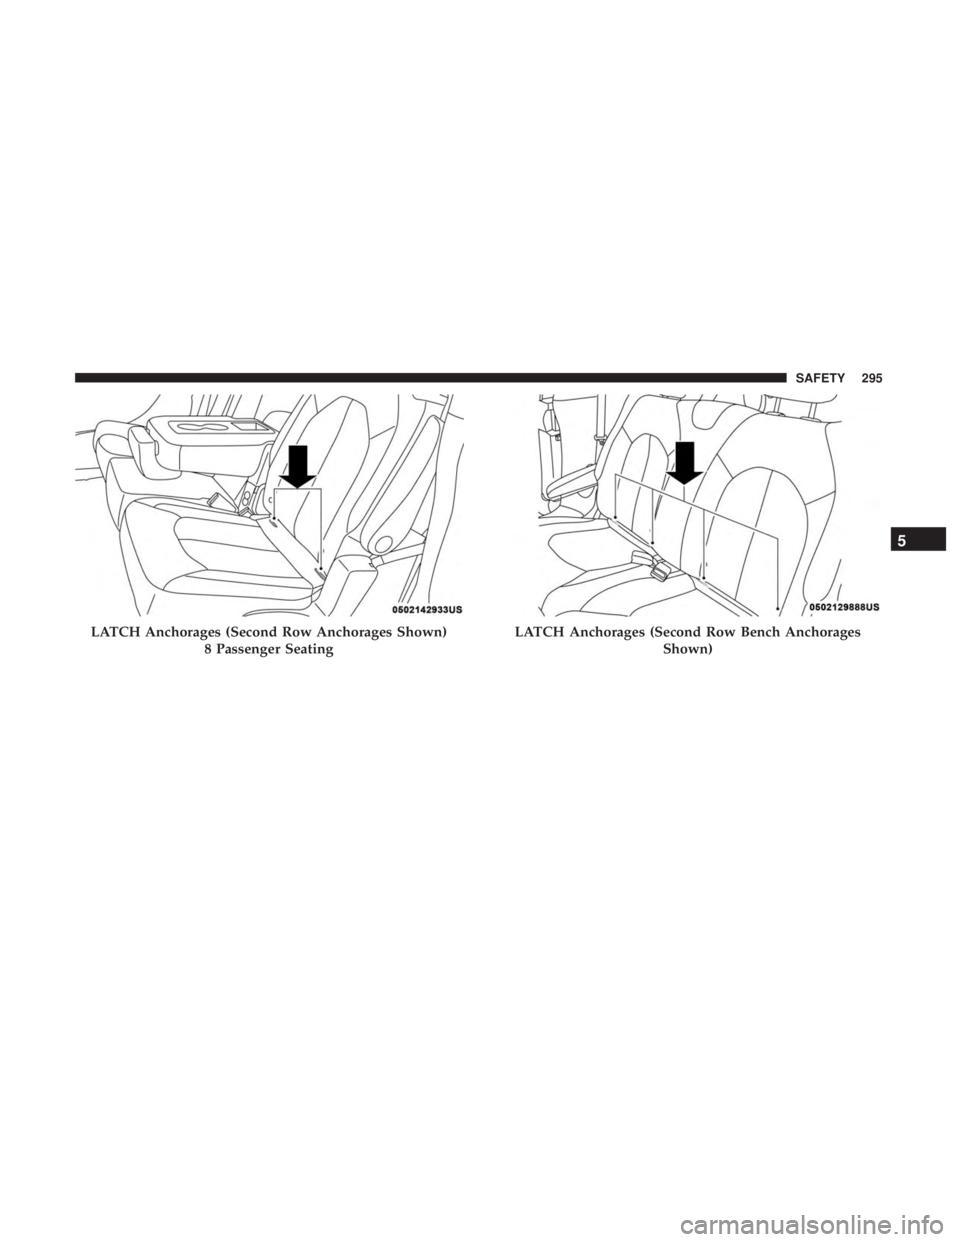 CHRYSLER PACIFICA 2019 Owners Manual LATCH Anchorages (Second Row Anchorages Shown)8 Passenger SeatingLATCH Anchorages (Second Row Bench Anchorages Shown)
5
SAFETY 295 